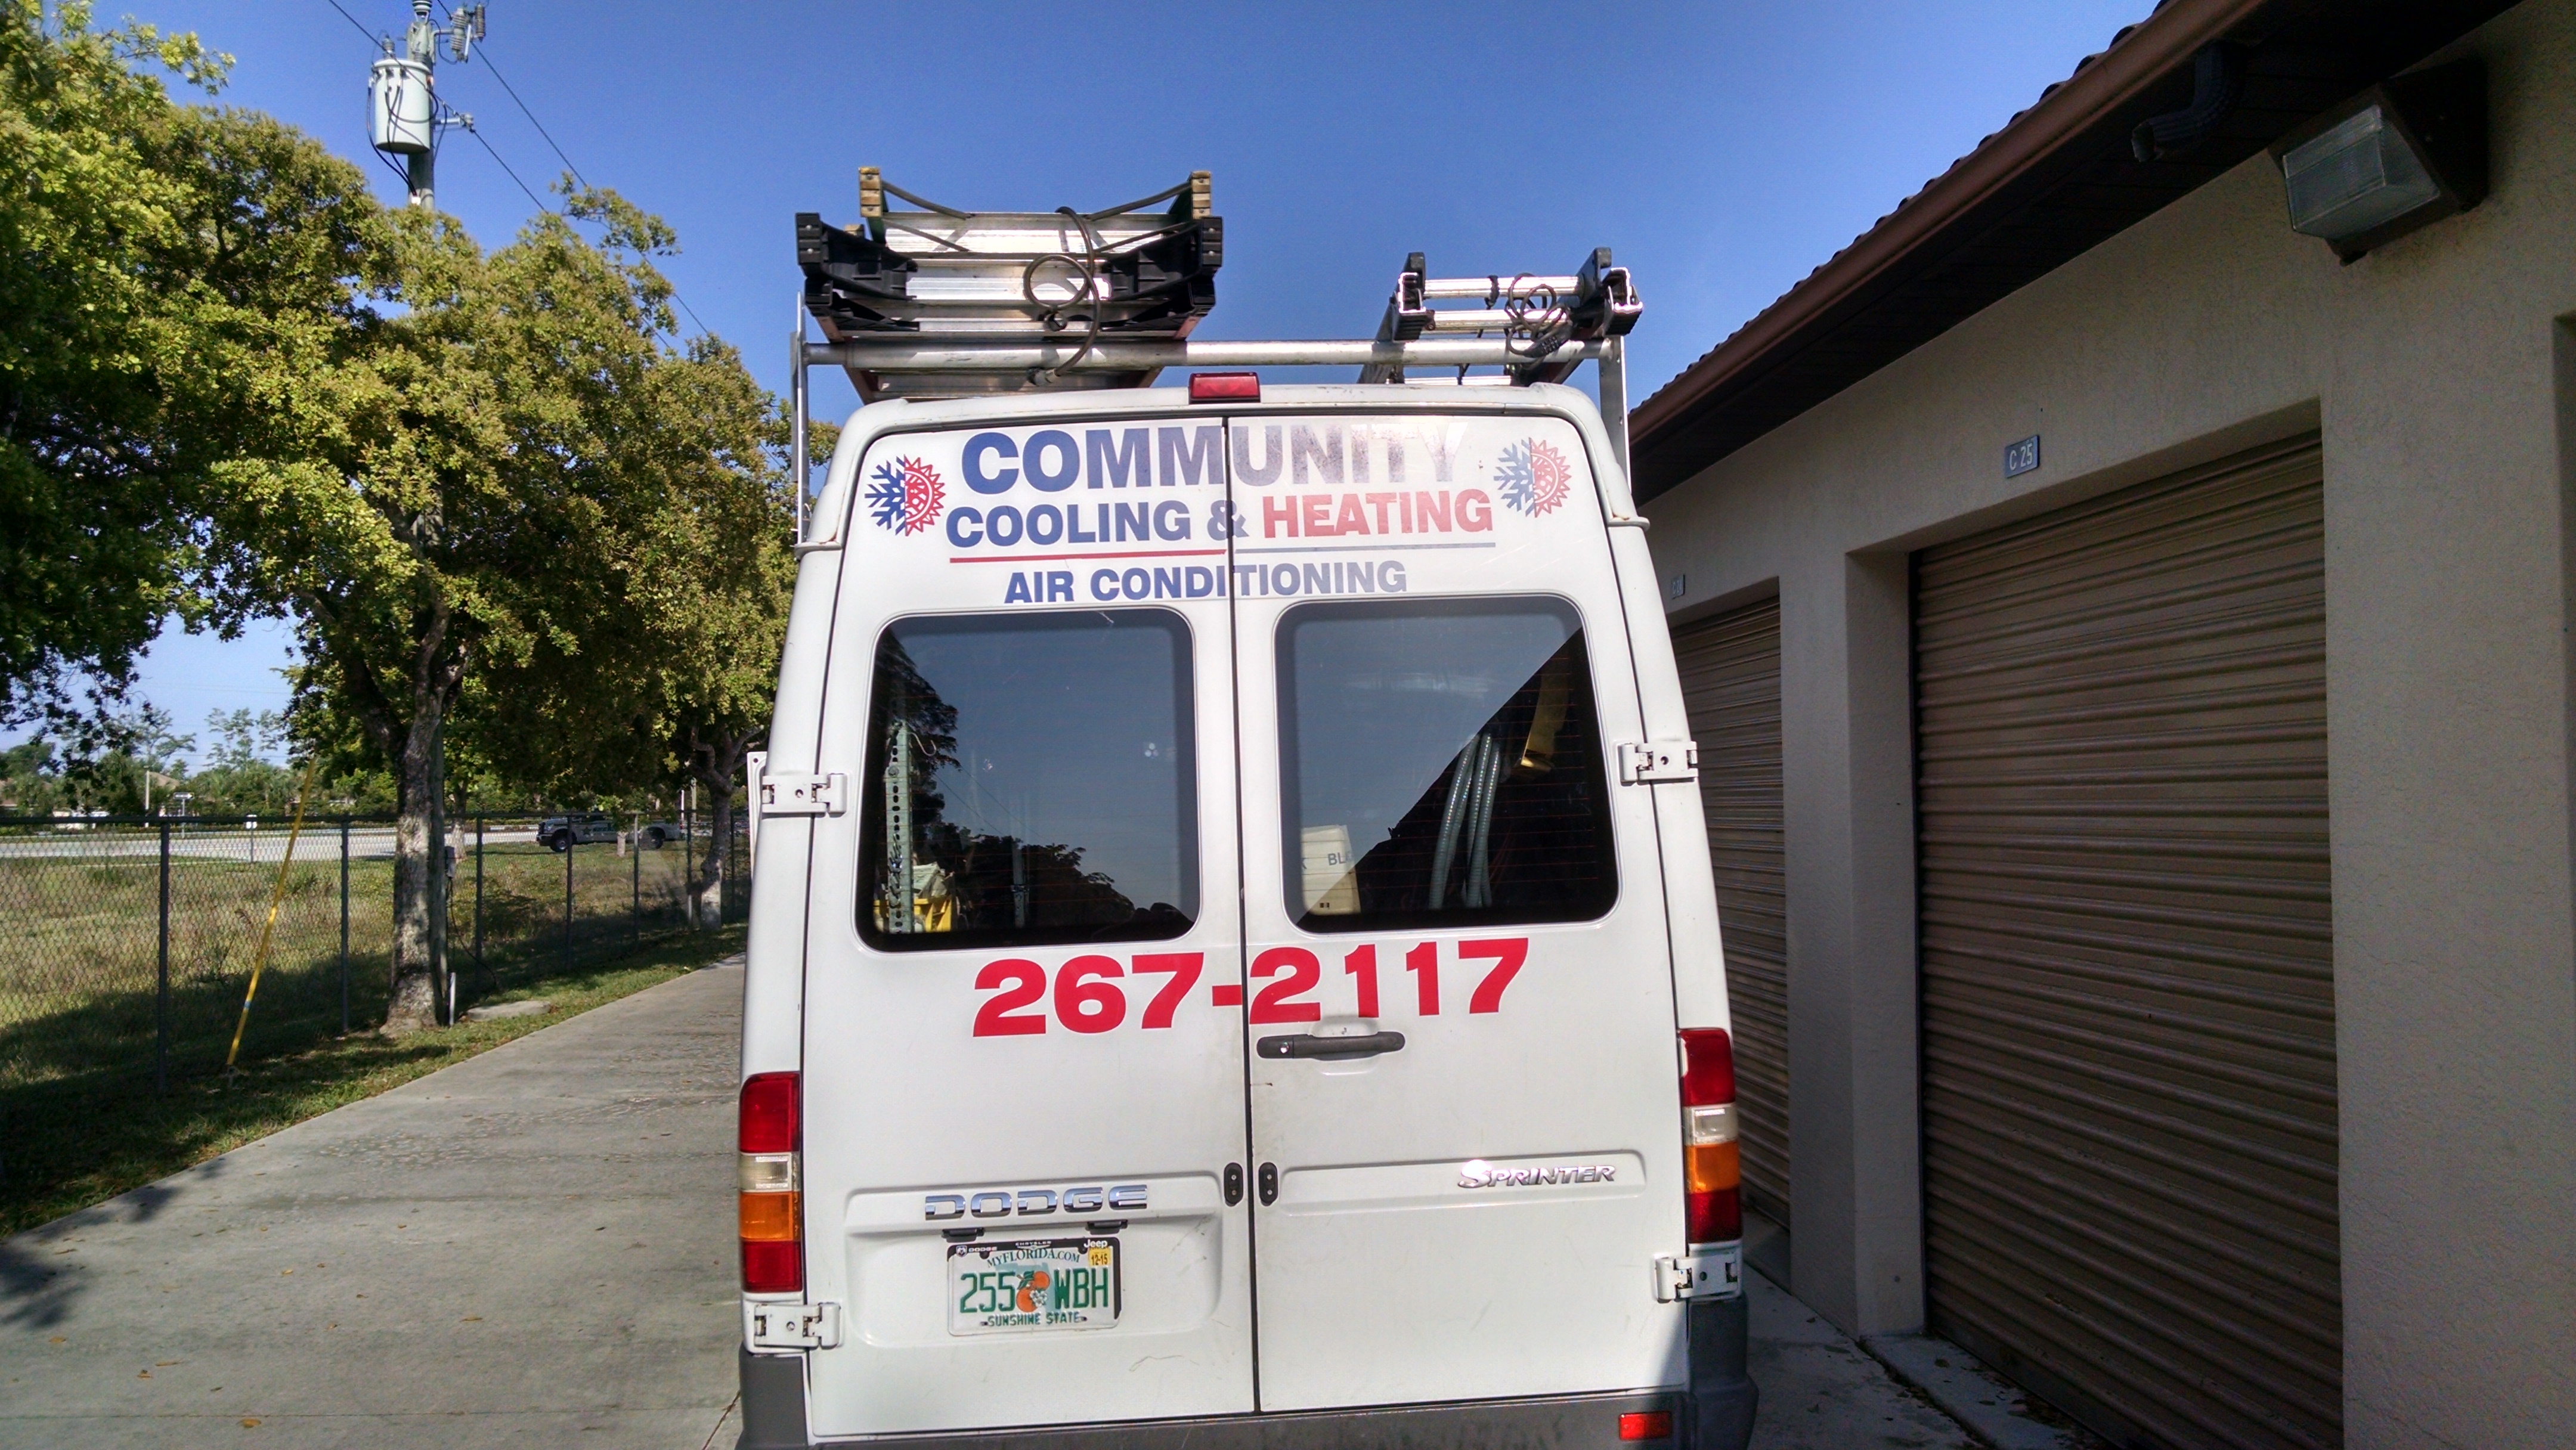 How do you repair the air conditioning system in a truck?